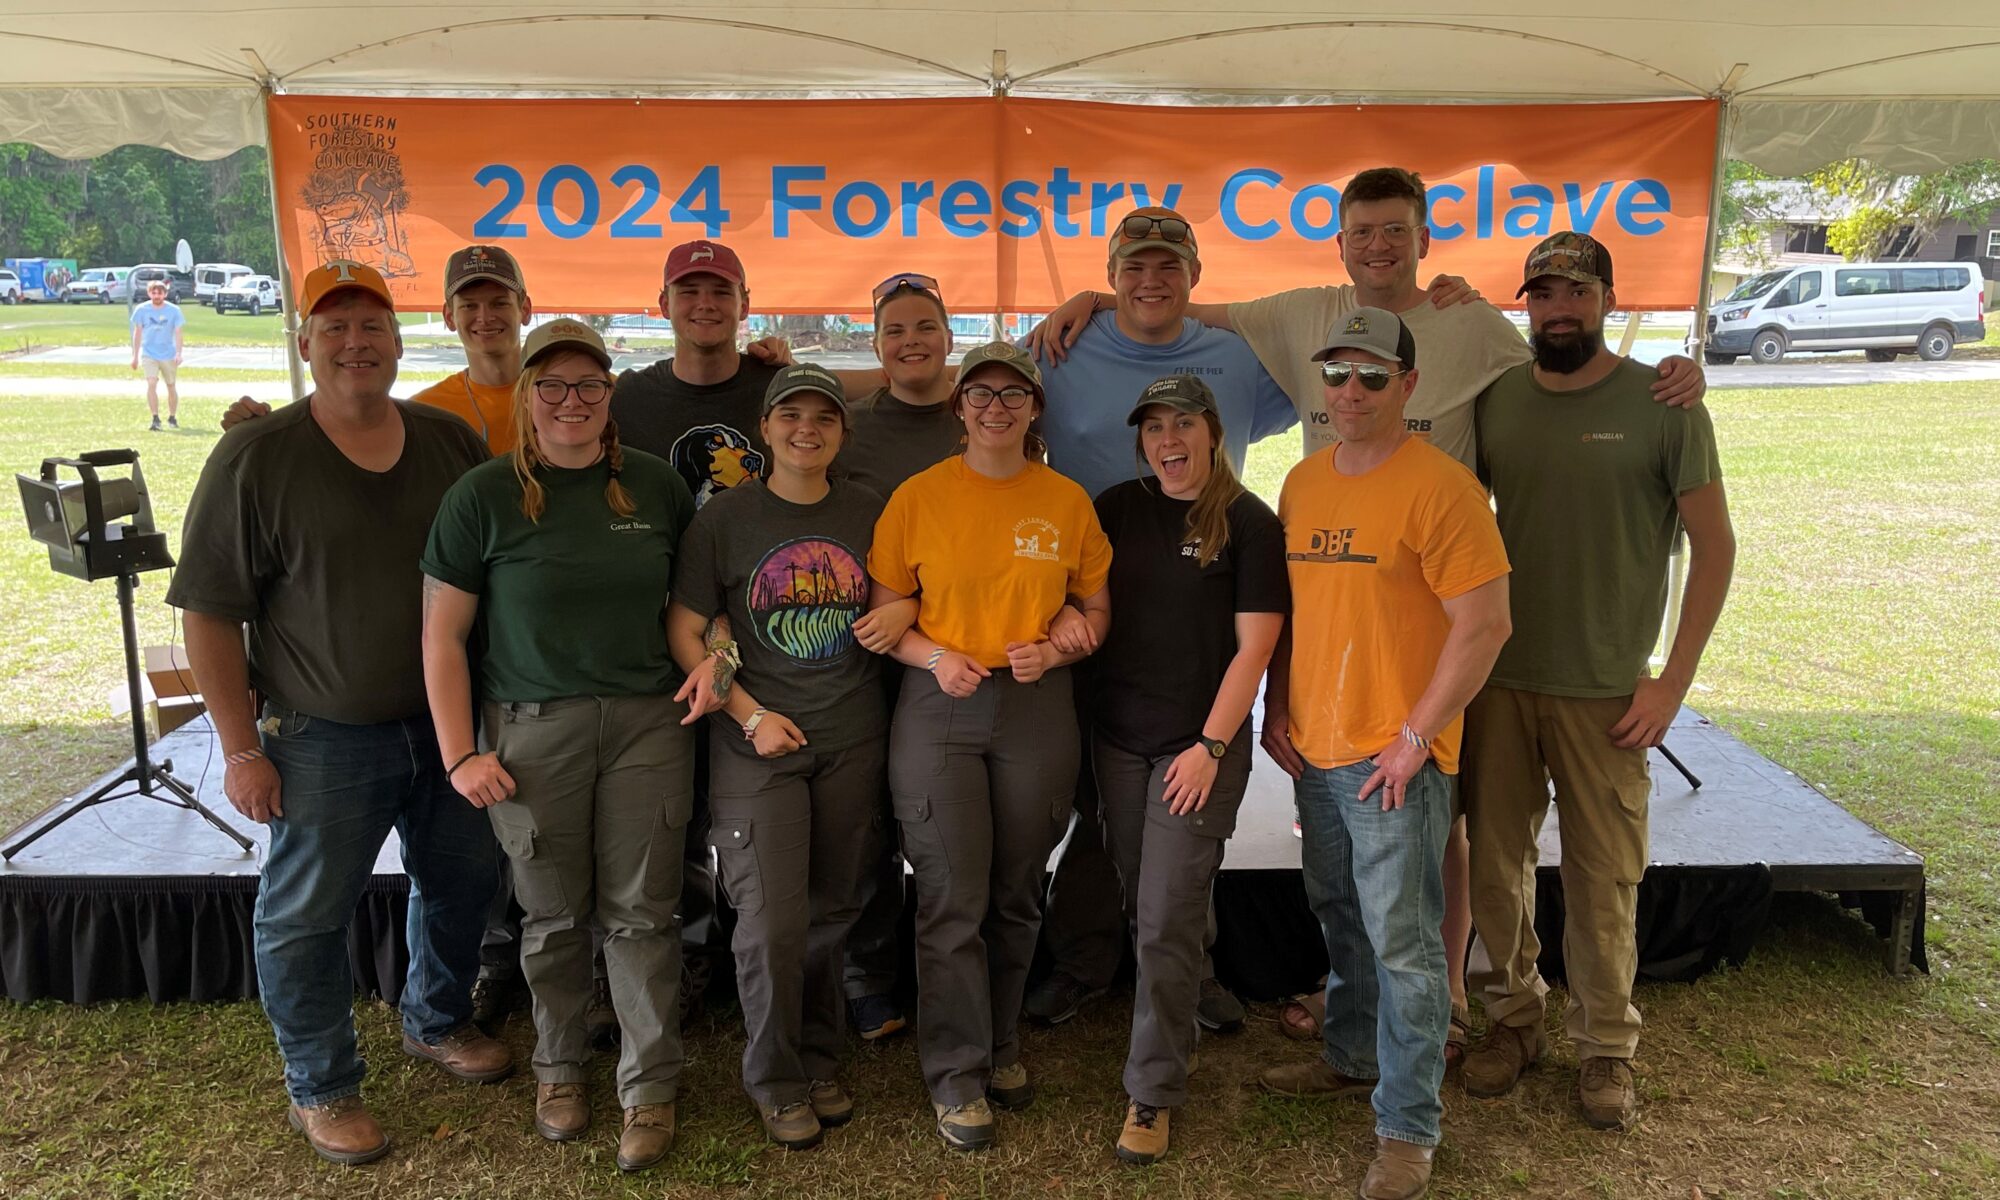 Twelve people post in front of a 2024 Forestry Conclave sign.